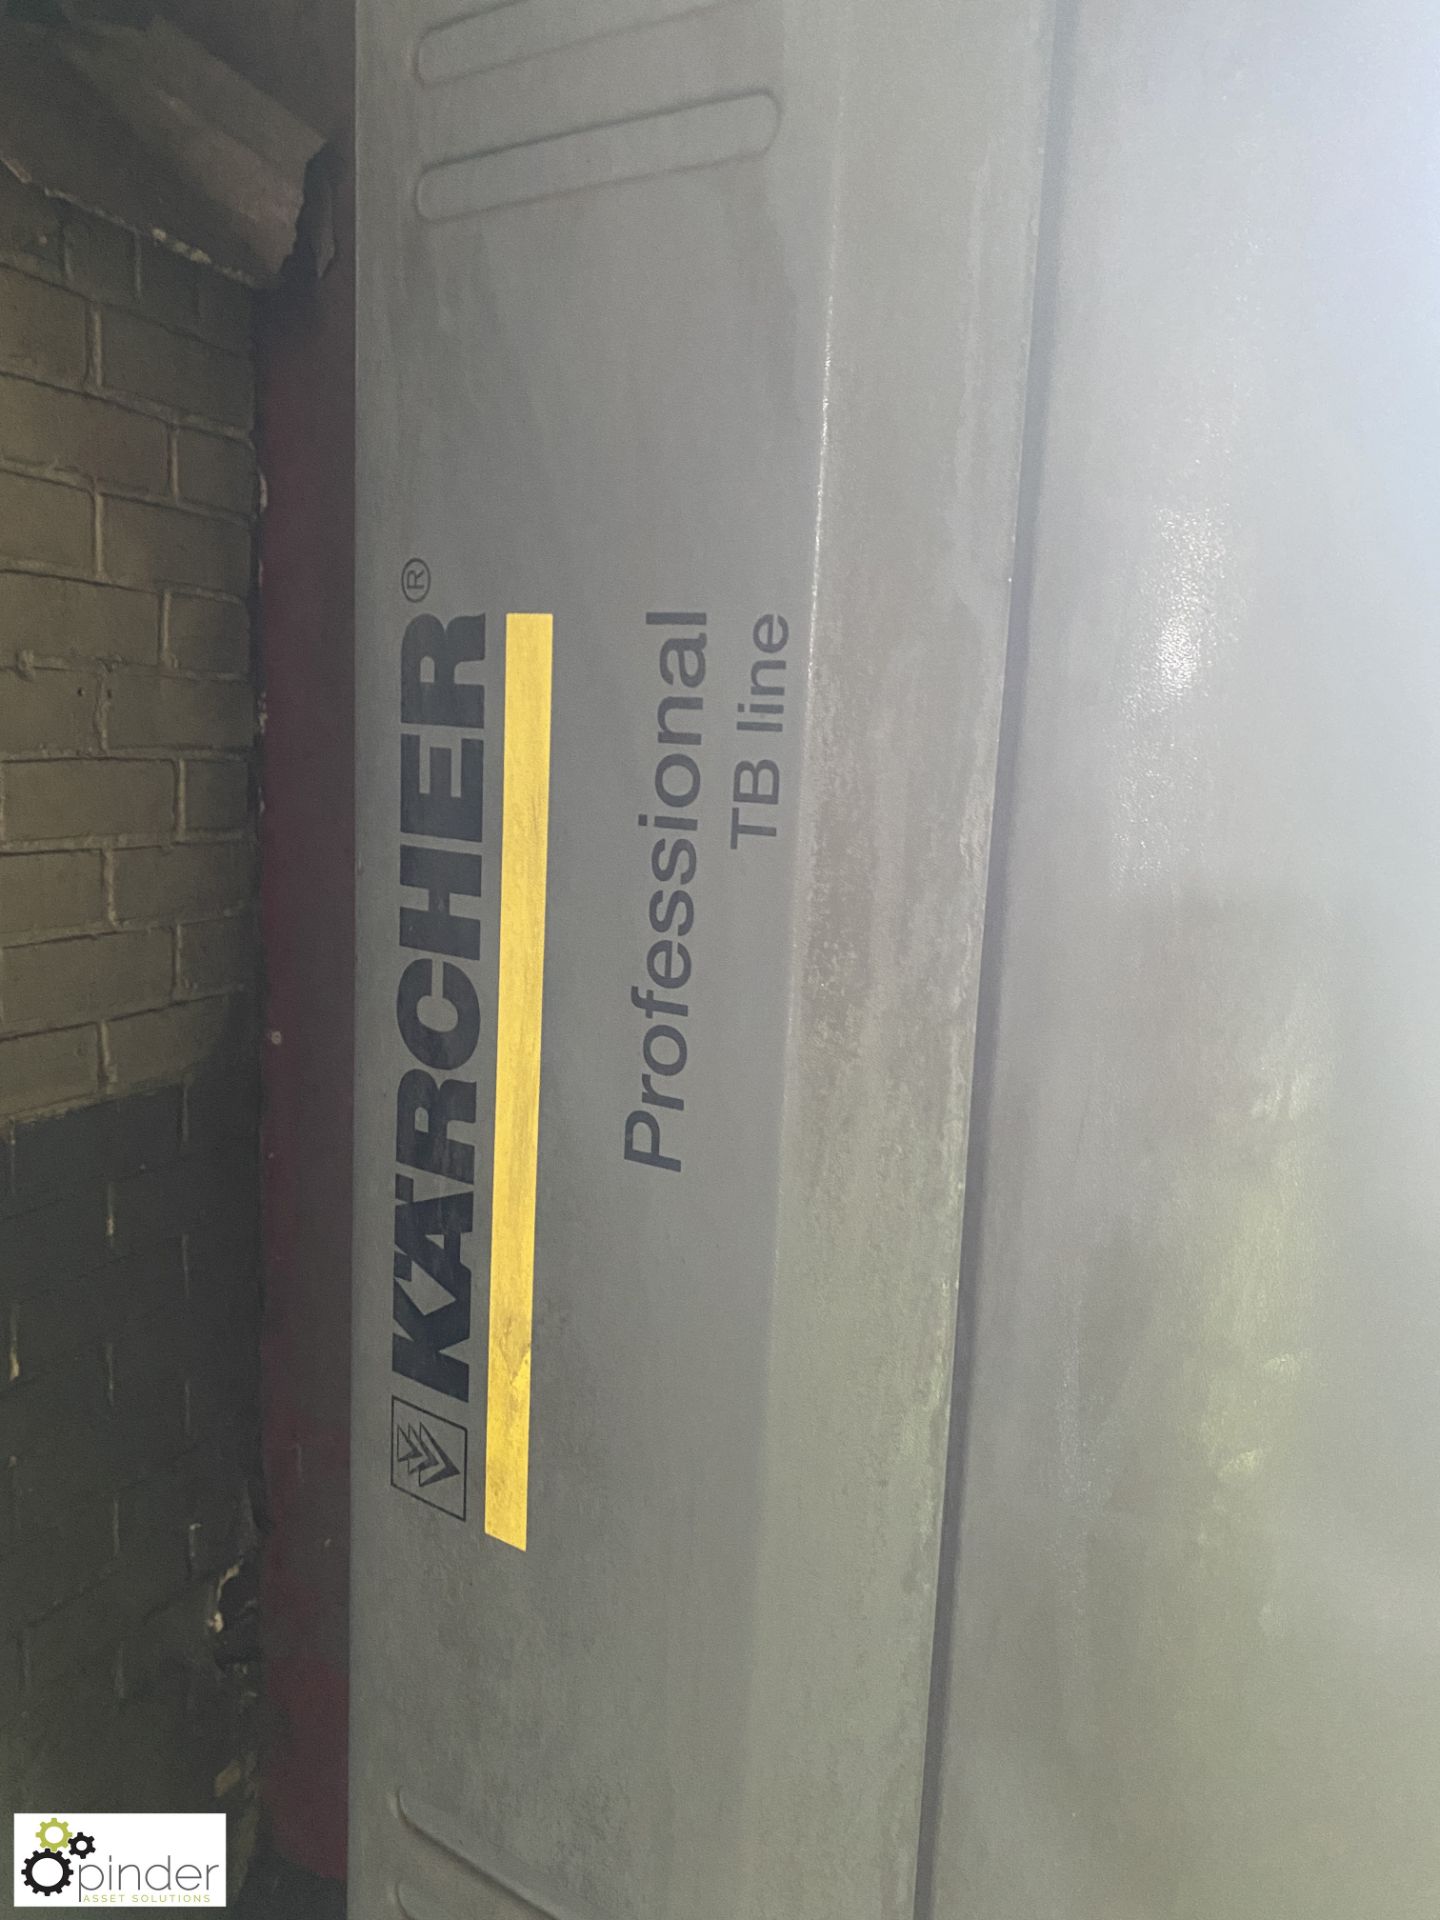 Karcher TBNS Professional Bus/Commercial Vehicle Wash, serial number 4.812-109.0, max wash height - Image 11 of 20